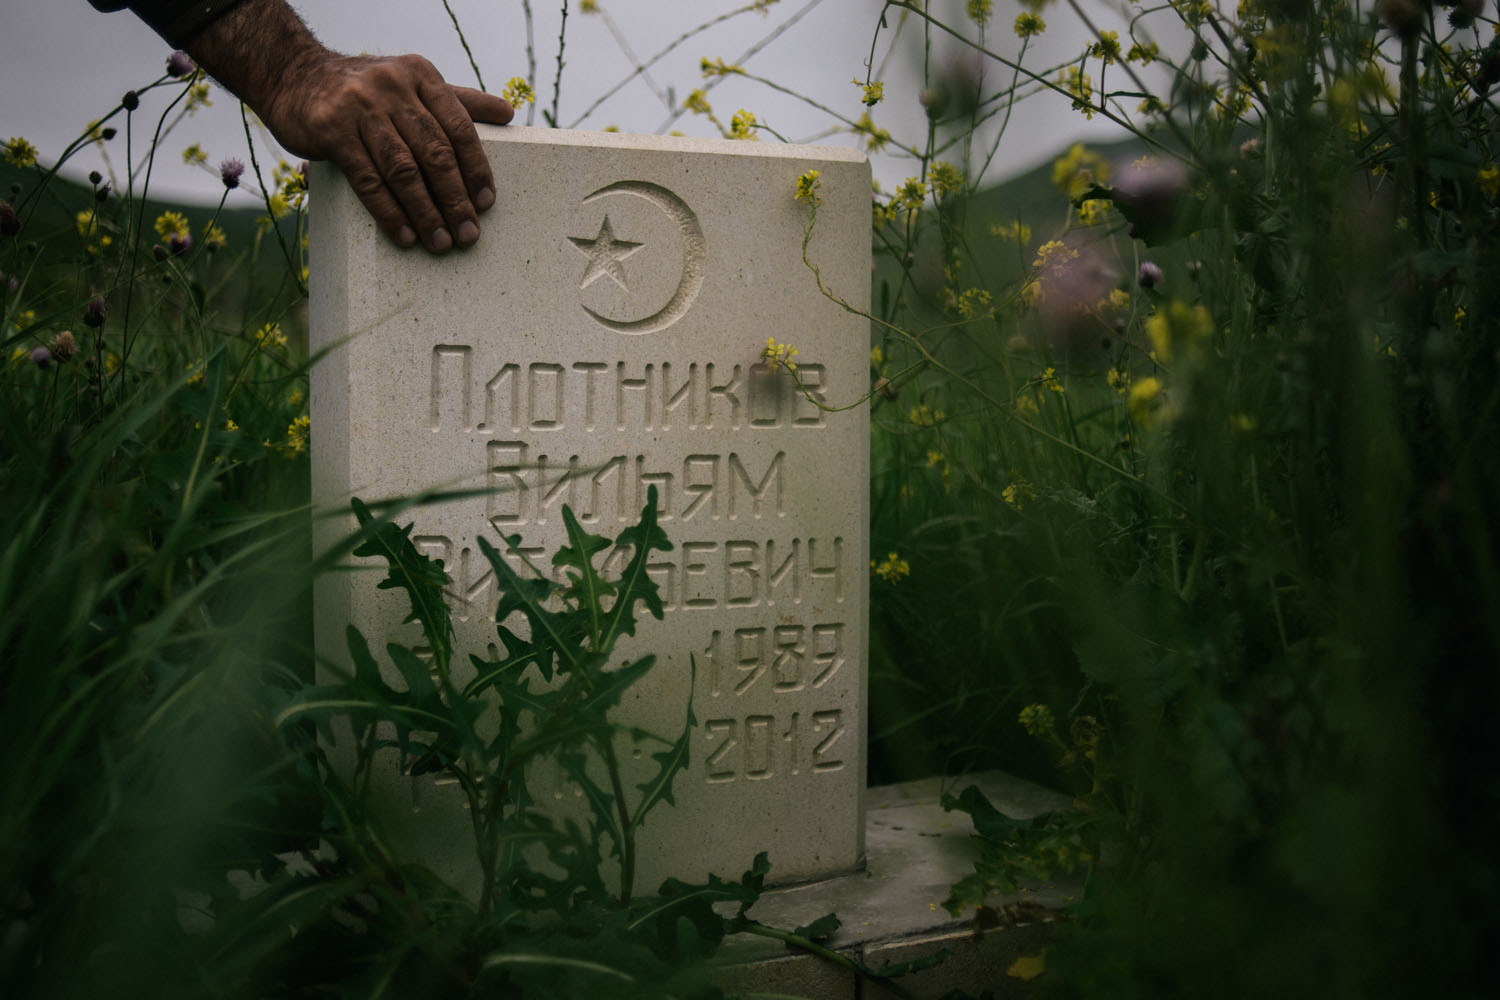 The grave of William Plotnikov is seen on May 12, 2013 in village UTAMYSH, where William Plotnikov lived and died